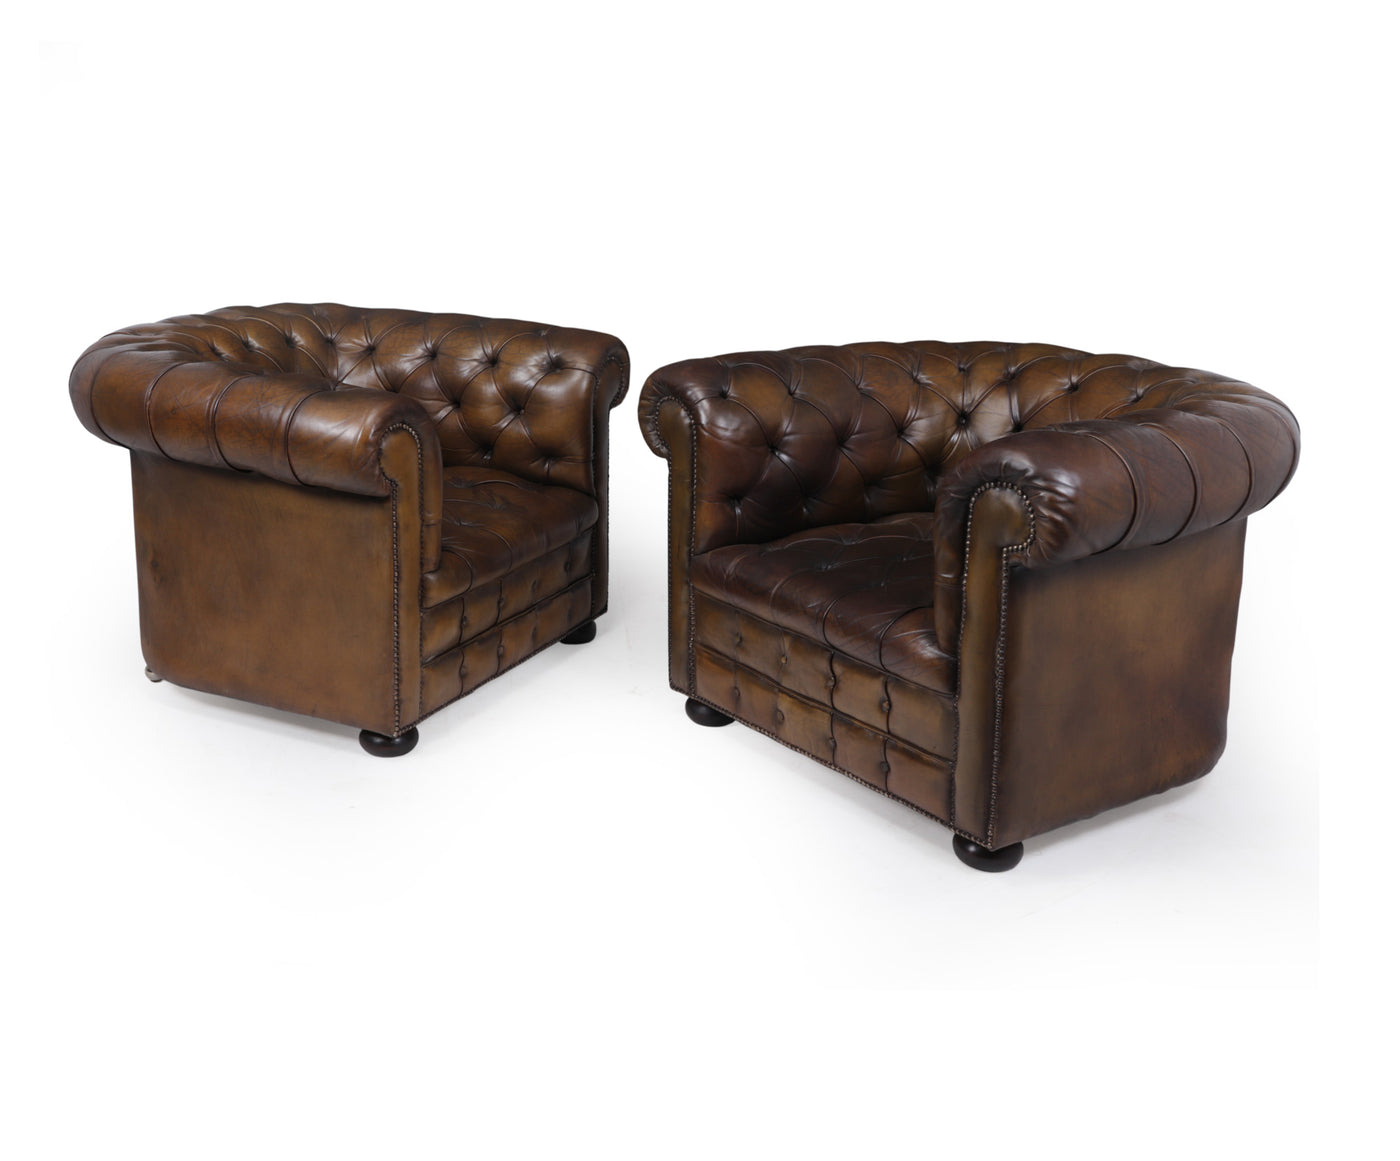  Leather Chesterfield Club Chairs